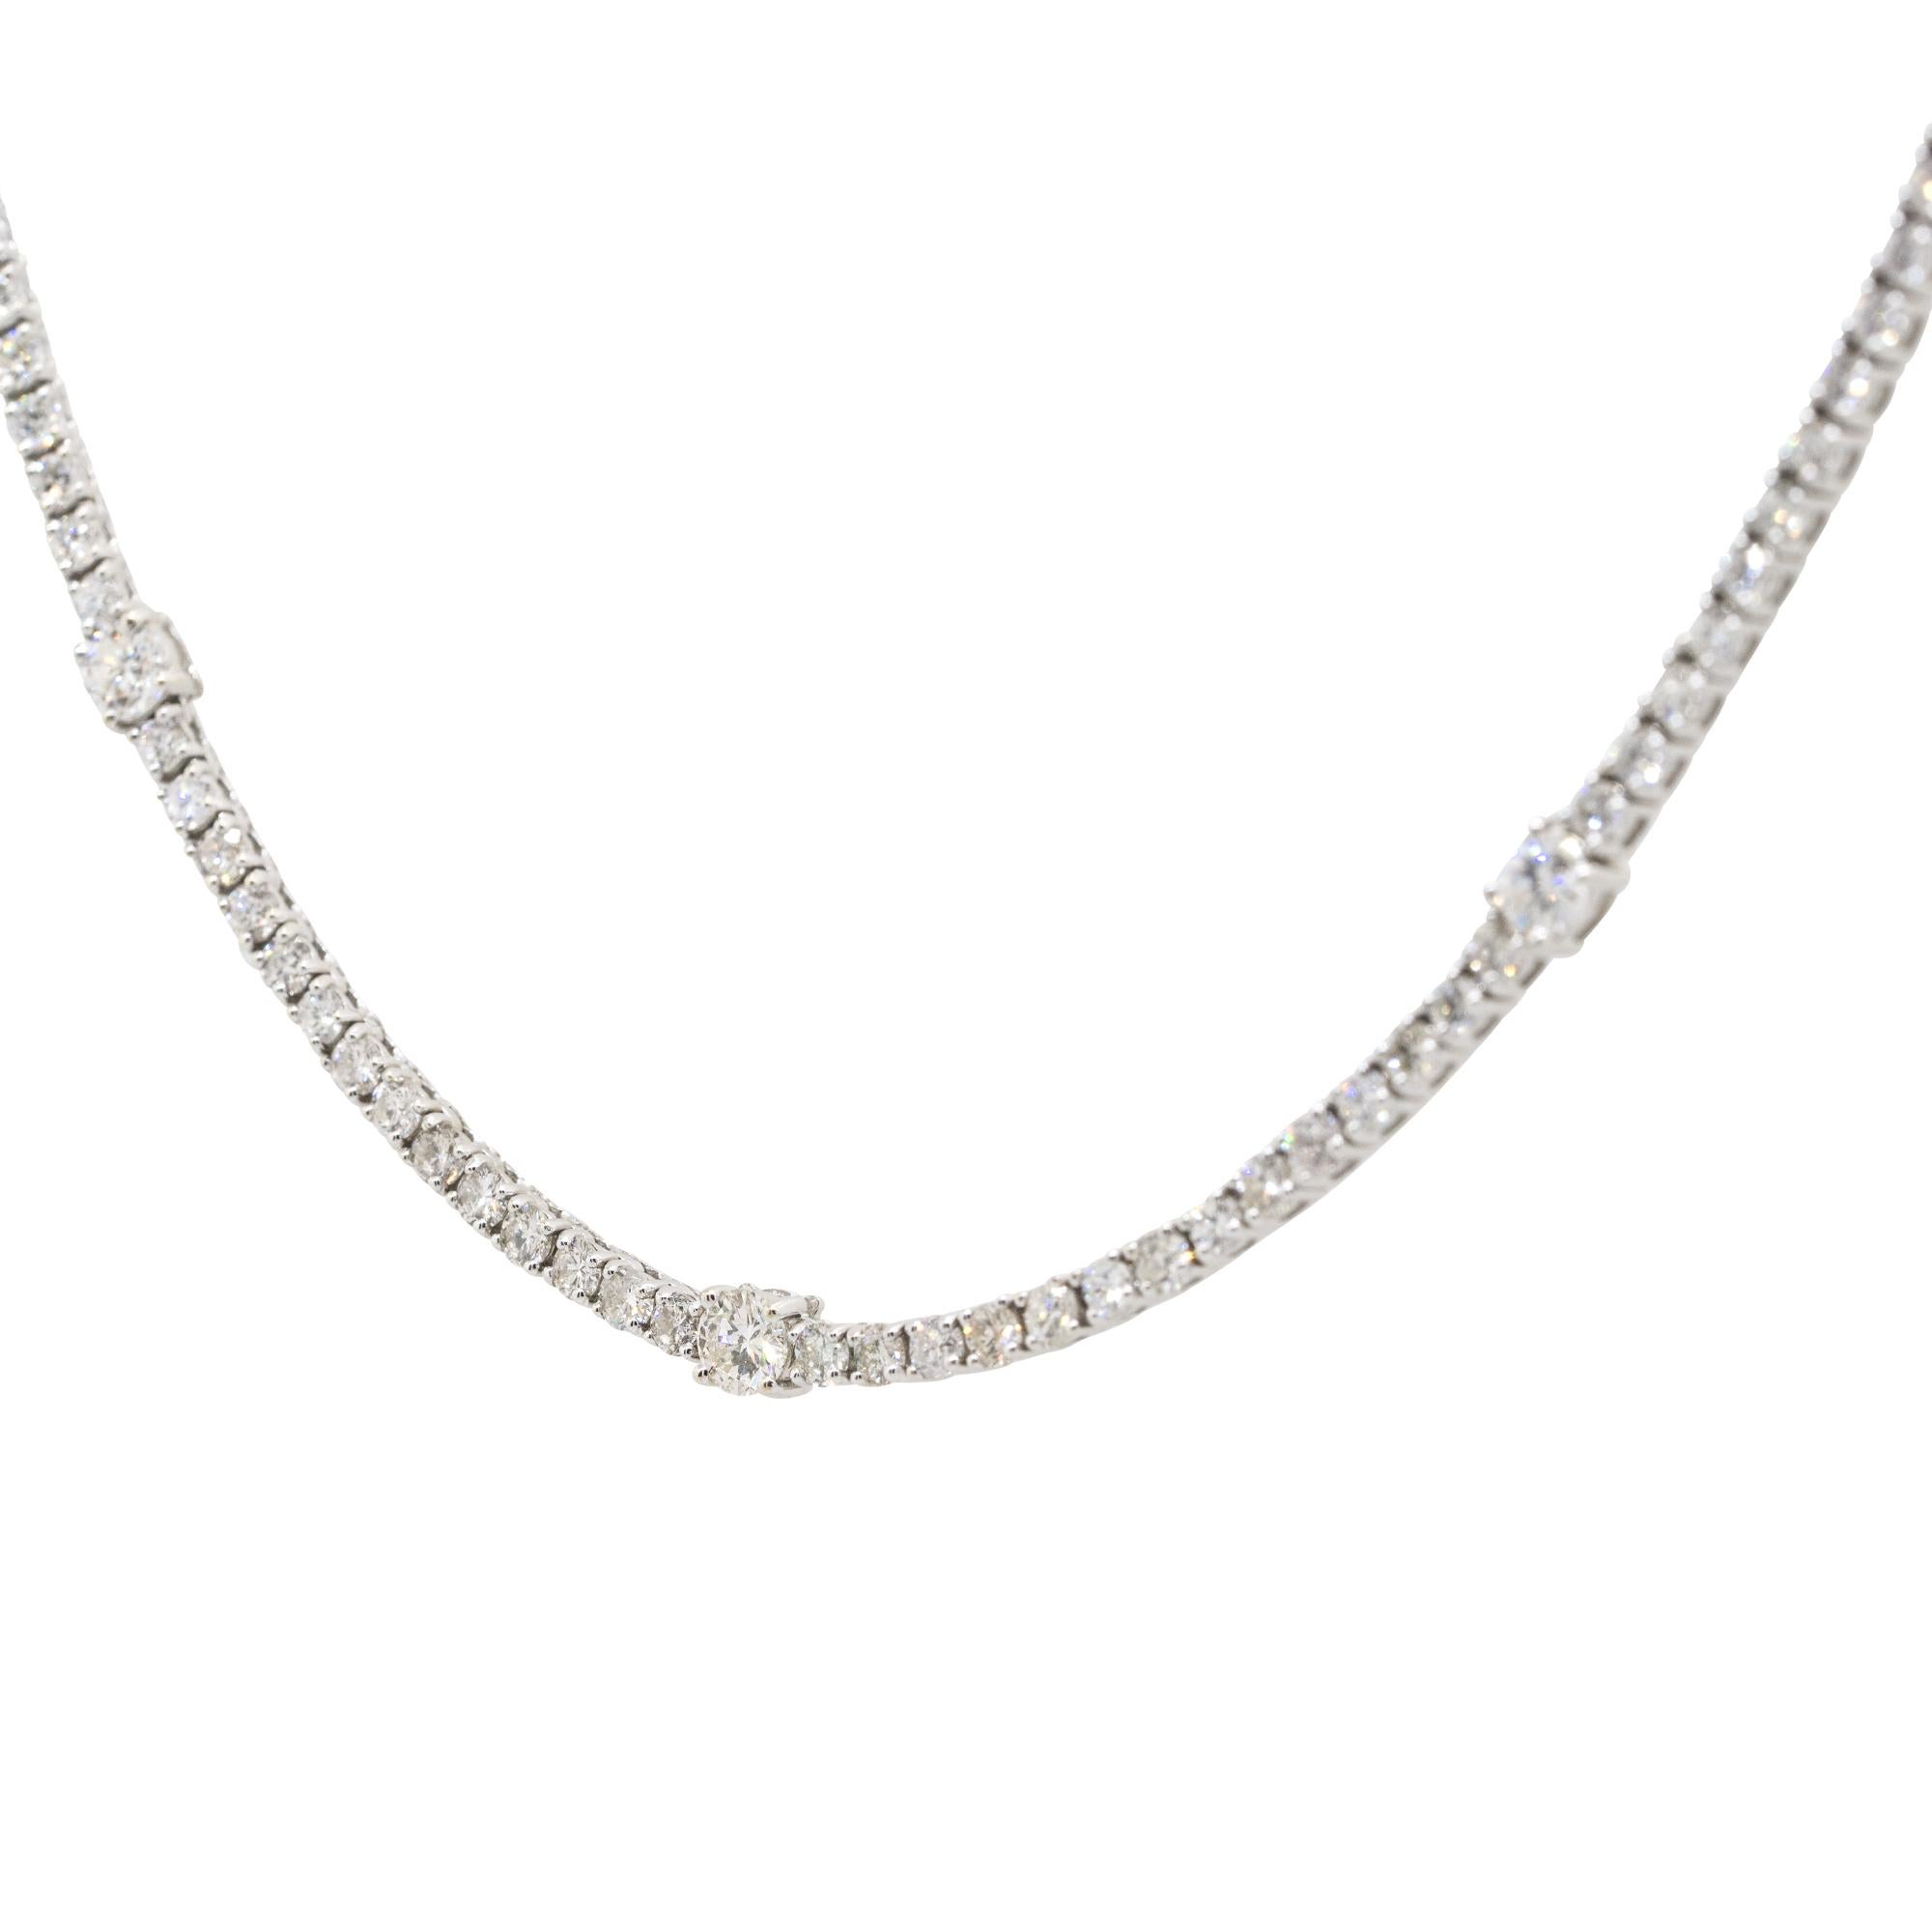 7.50 Carat Diamond Station Tennis Necklace 14 Karat In Stock In New Condition For Sale In Boca Raton, FL